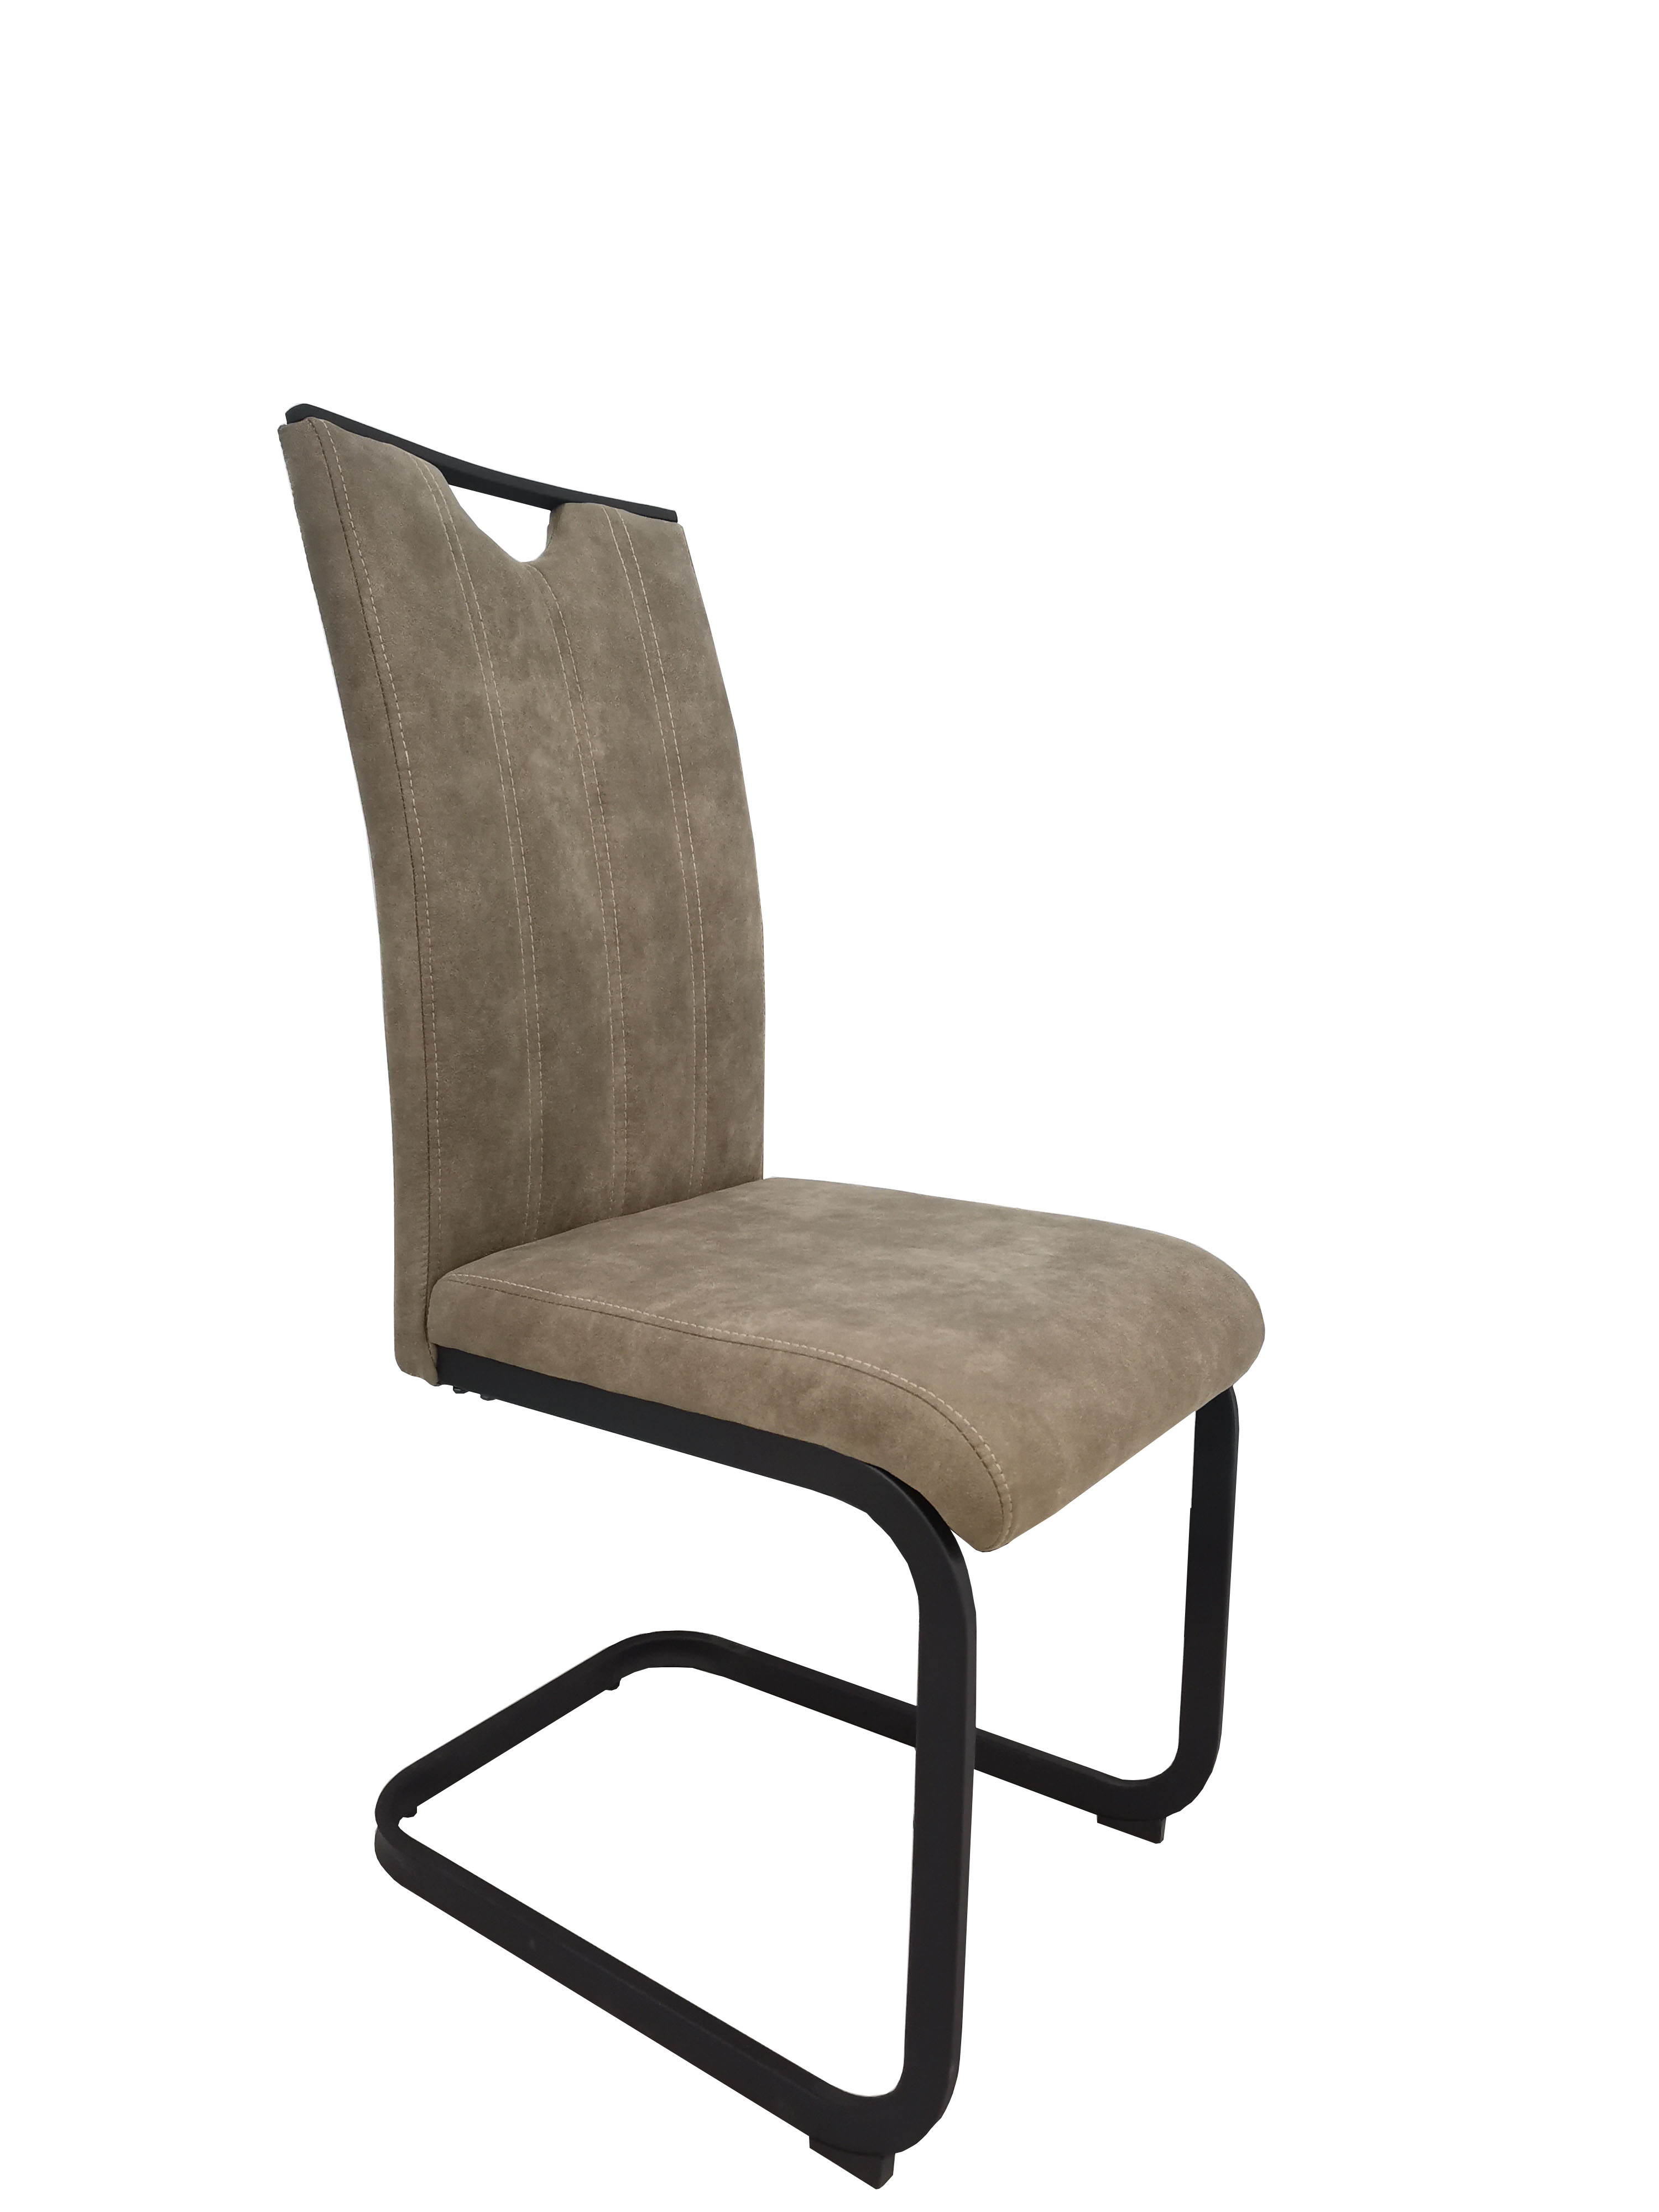 High back fabric colorful high quality nordic dining chair modern fabric chair with metal legs